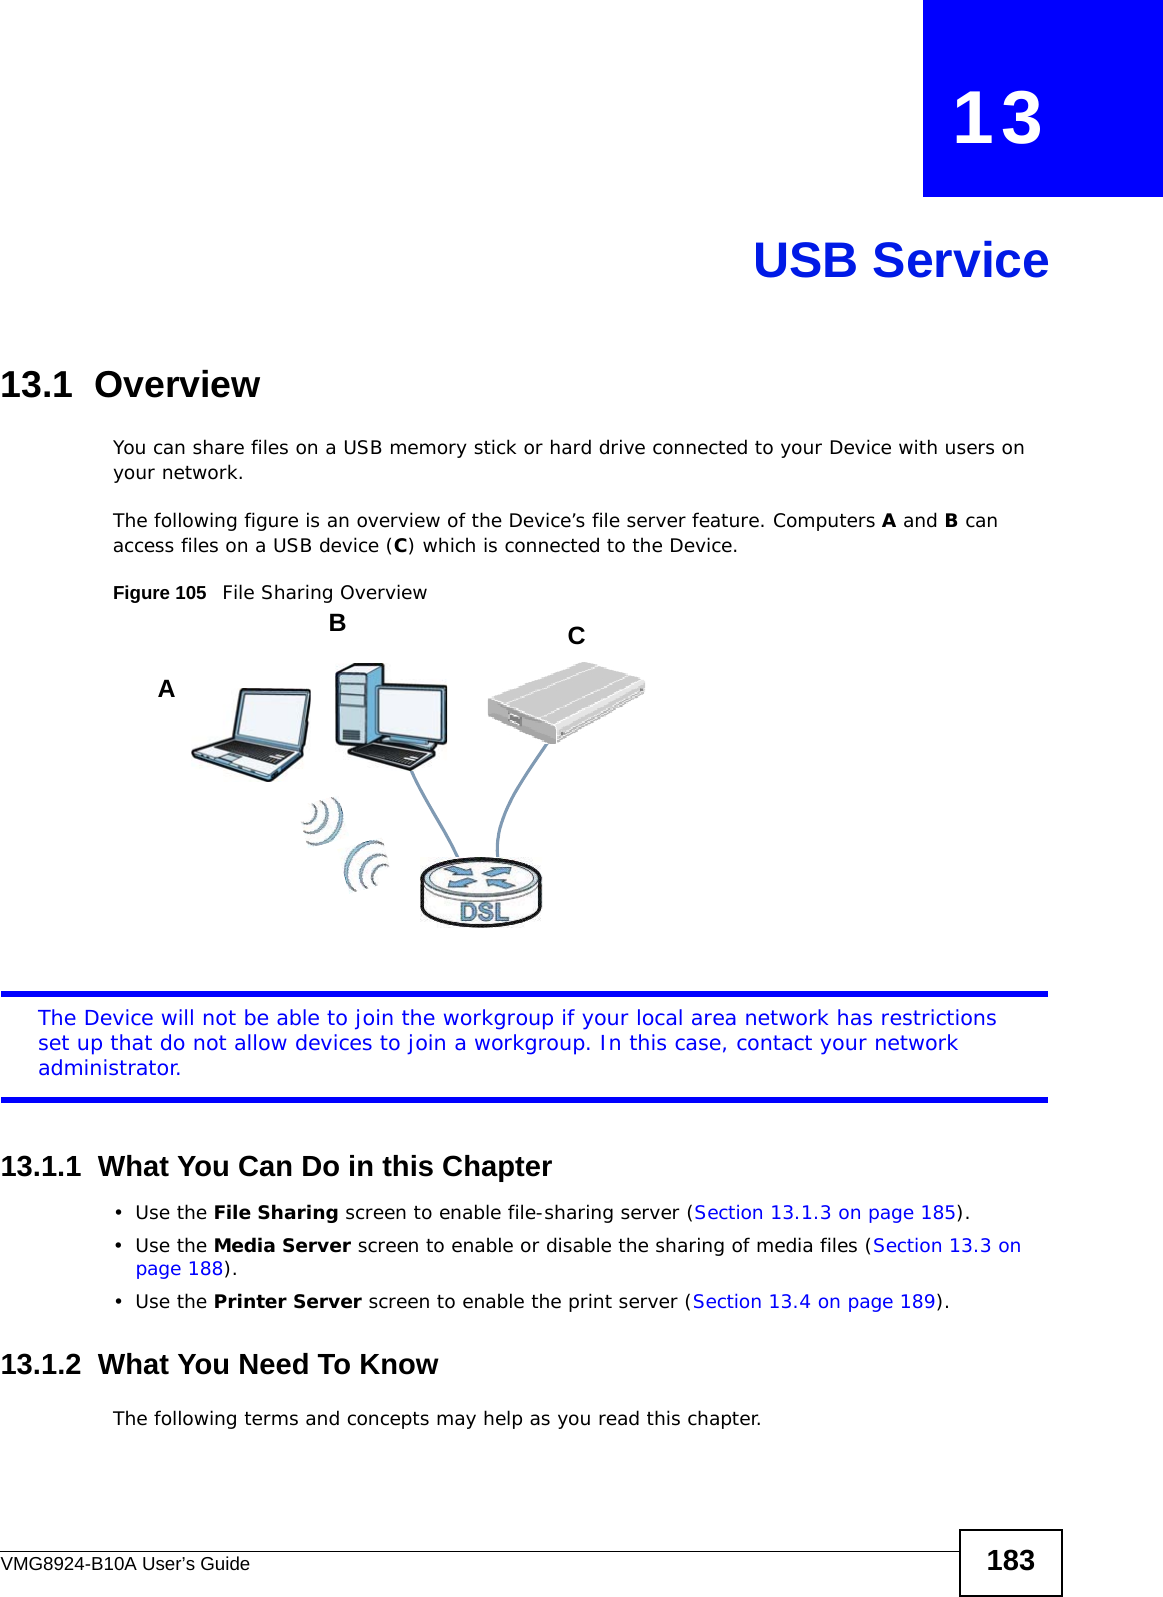 VMG8924-B10A User’s Guide 183CHAPTER   13USB Service13.1  Overview You can share files on a USB memory stick or hard drive connected to your Device with users on your network. The following figure is an overview of the Device’s file server feature. Computers A and B can access files on a USB device (C) which is connected to the Device.Figure 105   File Sharing OverviewThe Device will not be able to join the workgroup if your local area network has restrictions set up that do not allow devices to join a workgroup. In this case, contact your network administrator.13.1.1  What You Can Do in this Chapter•Use the File Sharing screen to enable file-sharing server (Section 13.1.3 on page 185). •Use the Media Server screen to enable or disable the sharing of media files (Section 13.3 on page 188).•Use the Printer Server screen to enable the print server (Section 13.4 on page 189).13.1.2  What You Need To KnowThe following terms and concepts may help as you read this chapter.ABC